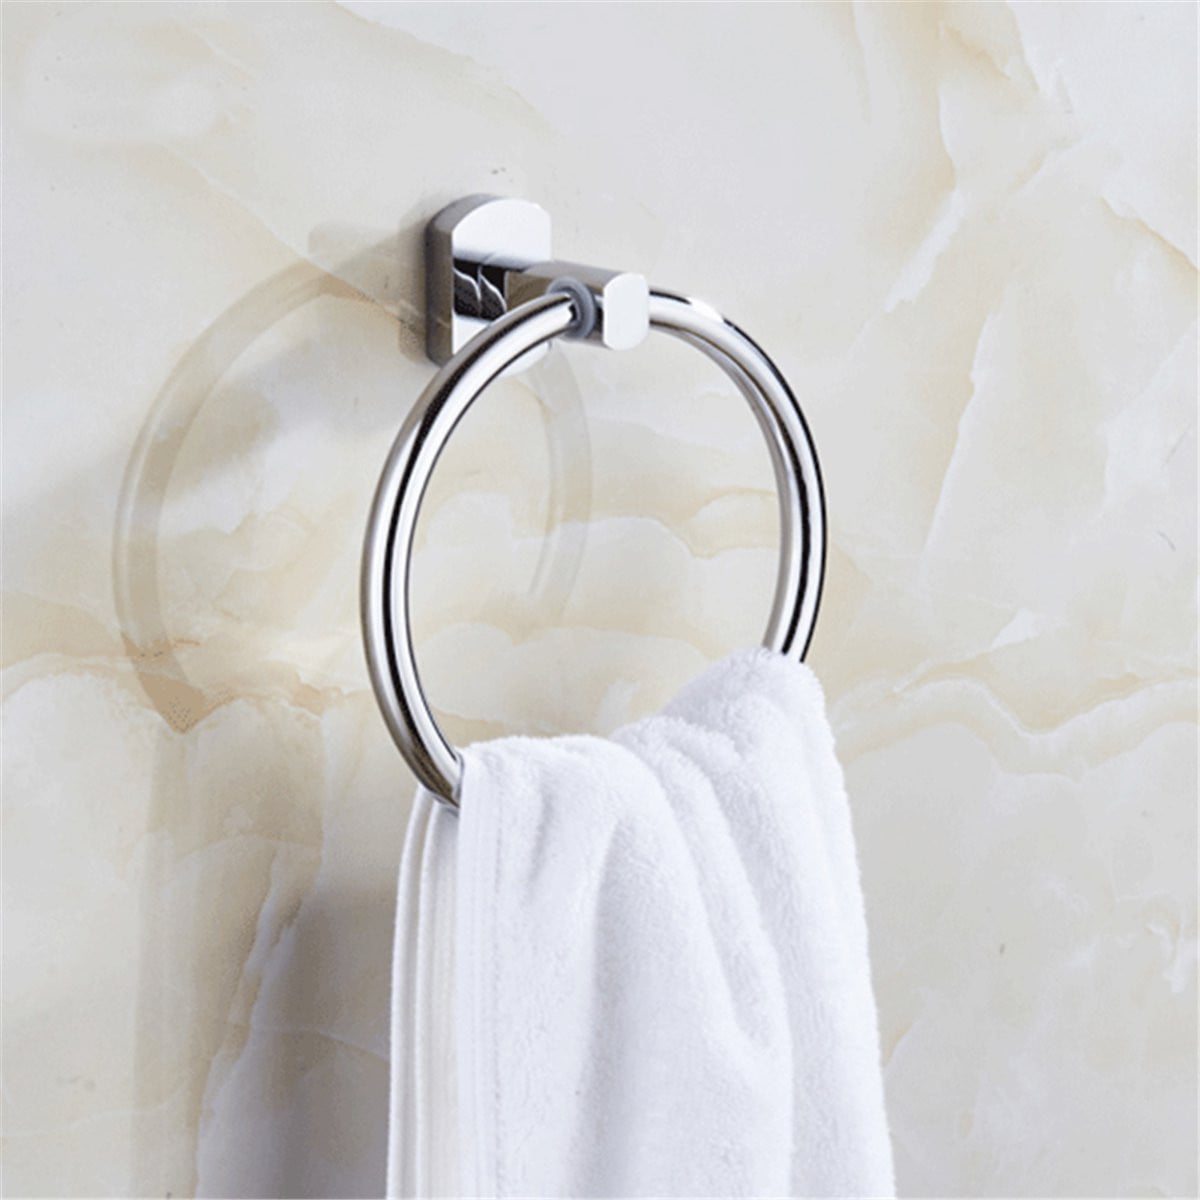 Towel Rings for Bathrooms Wall Mounted Hand Towel Ring Contemporary Style Stainless Steel Chrome Bath Accessories Silver